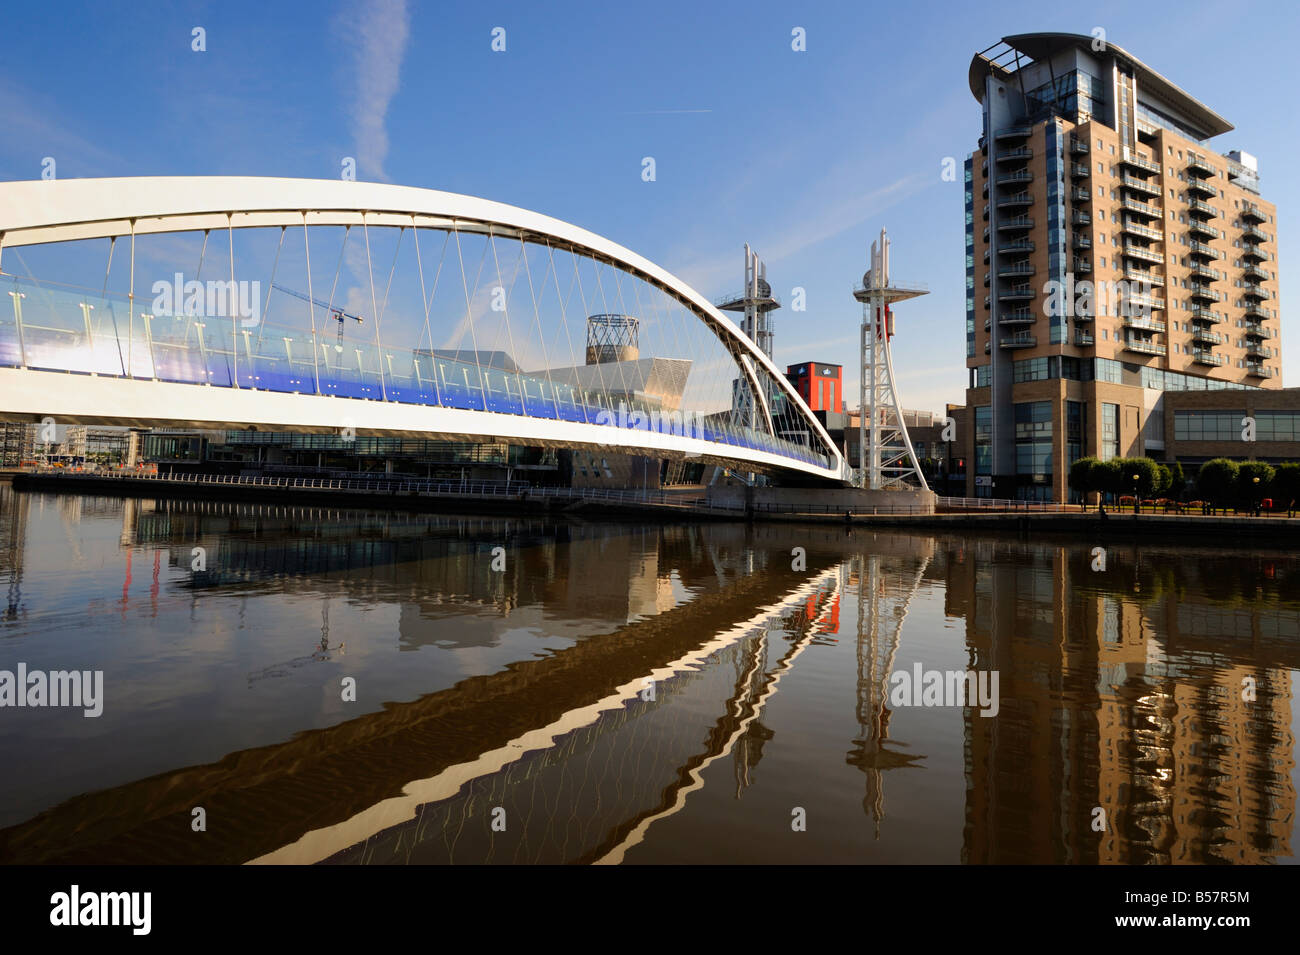 The Lowry Bridge over the Manchester Ship Canal, Salford Quays, Greater Manchester, England, United Kingdom, Europe Stock Photo